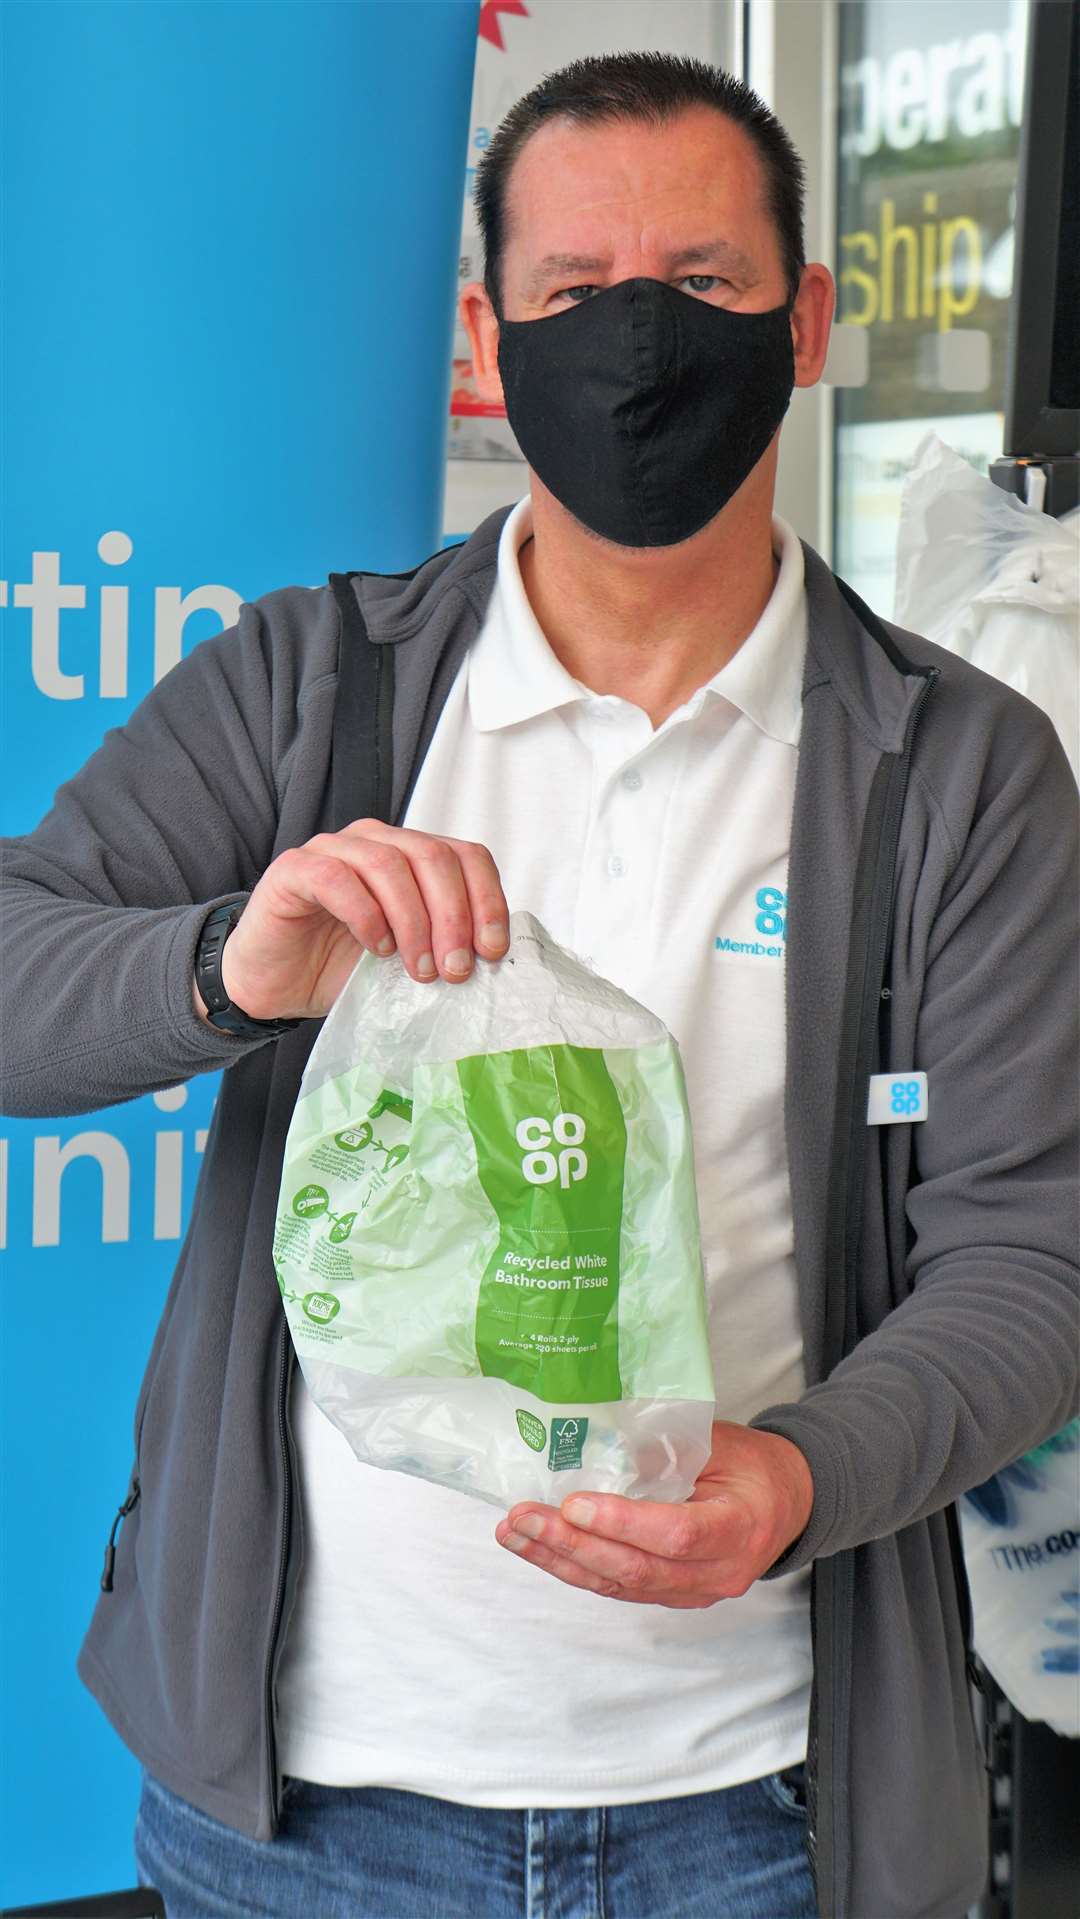 Jamie shows a typical soft plastic bag that can be deposited at its stores for recycling. Councils currently do not recycle such items.